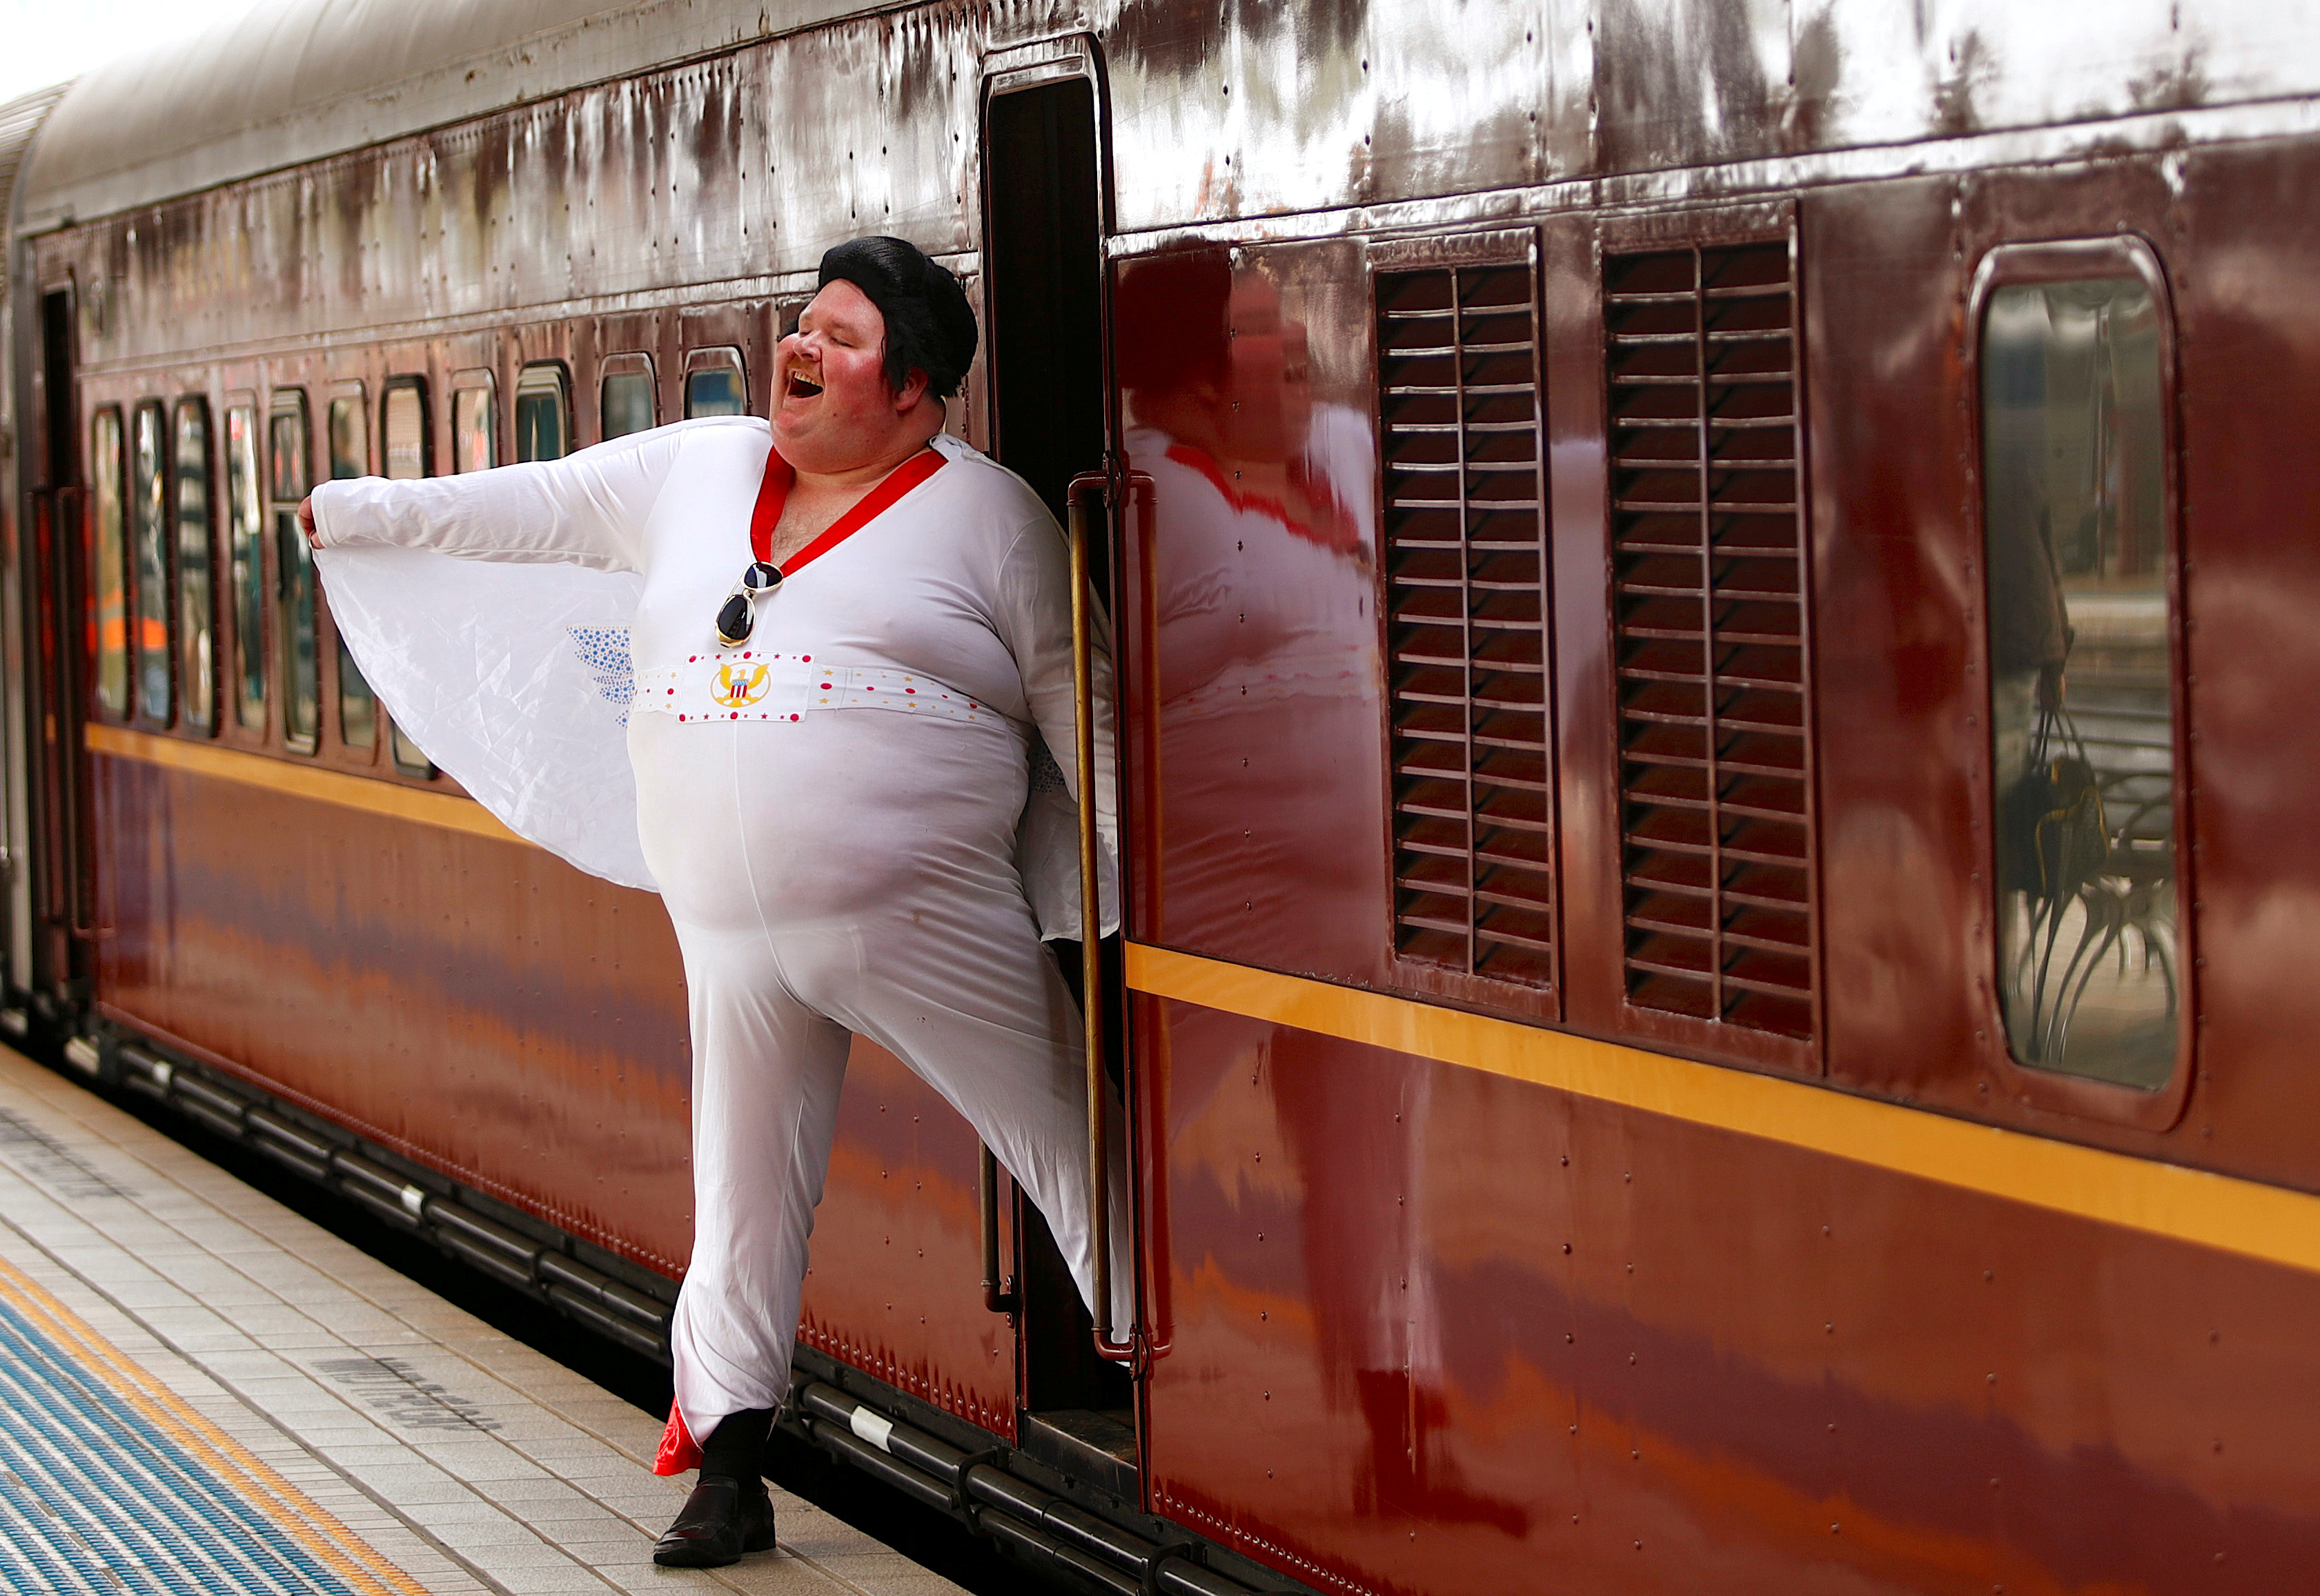 Elvis Presley impersonator Wright poses next to the Elvis Express train at Sydney's Central station before it departs for the 26th annual Elvis Festival